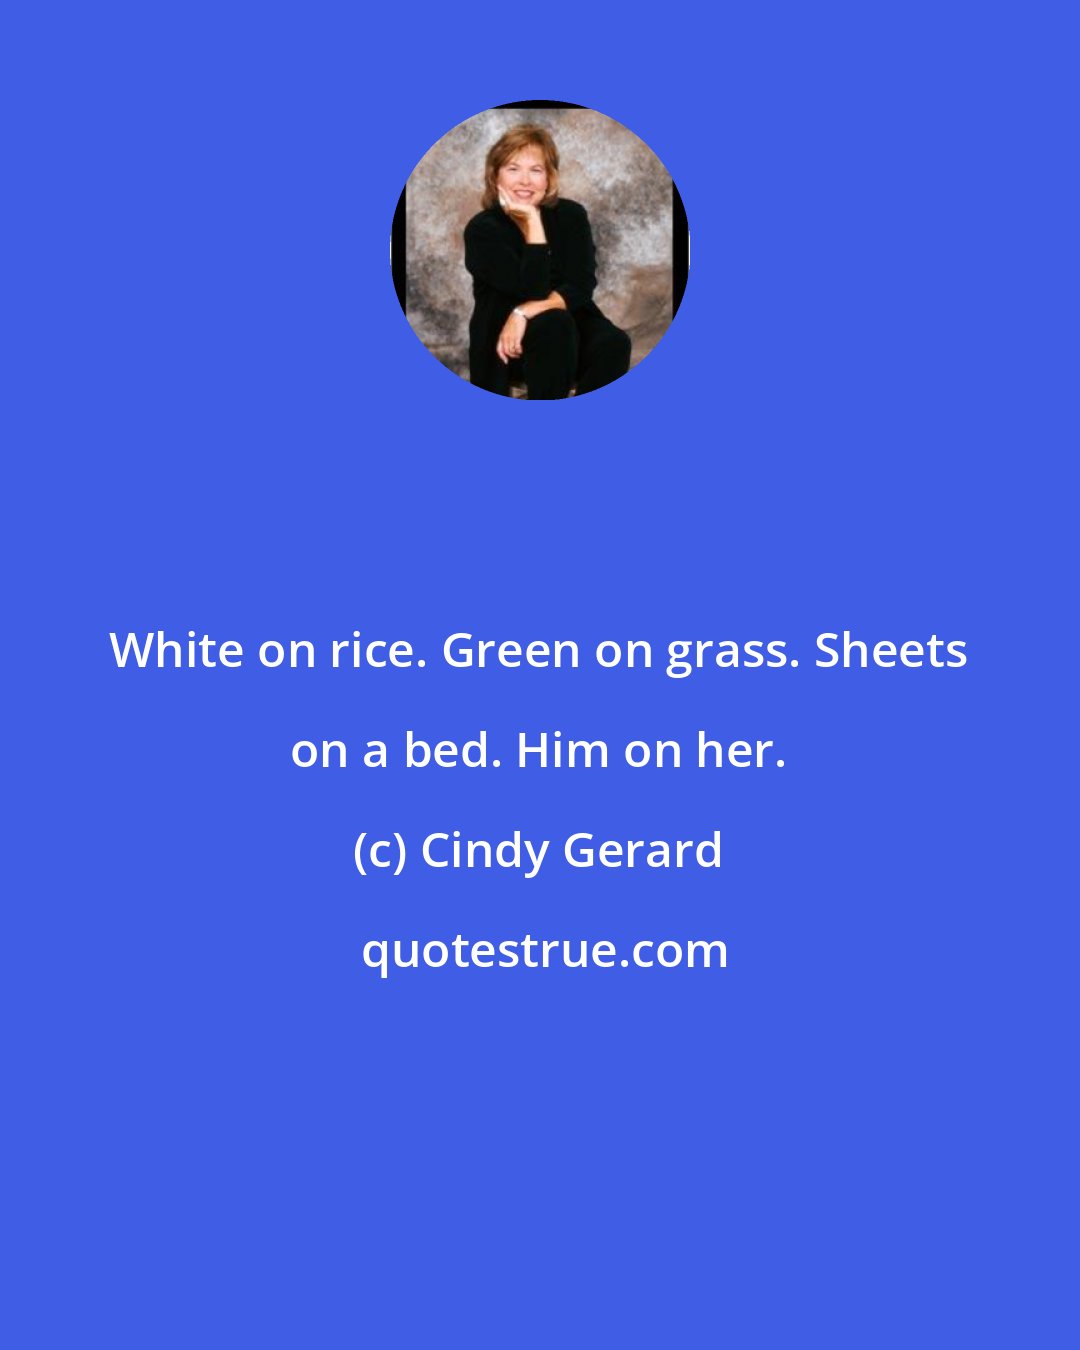 Cindy Gerard: White on rice. Green on grass. Sheets on a bed. Him on her.